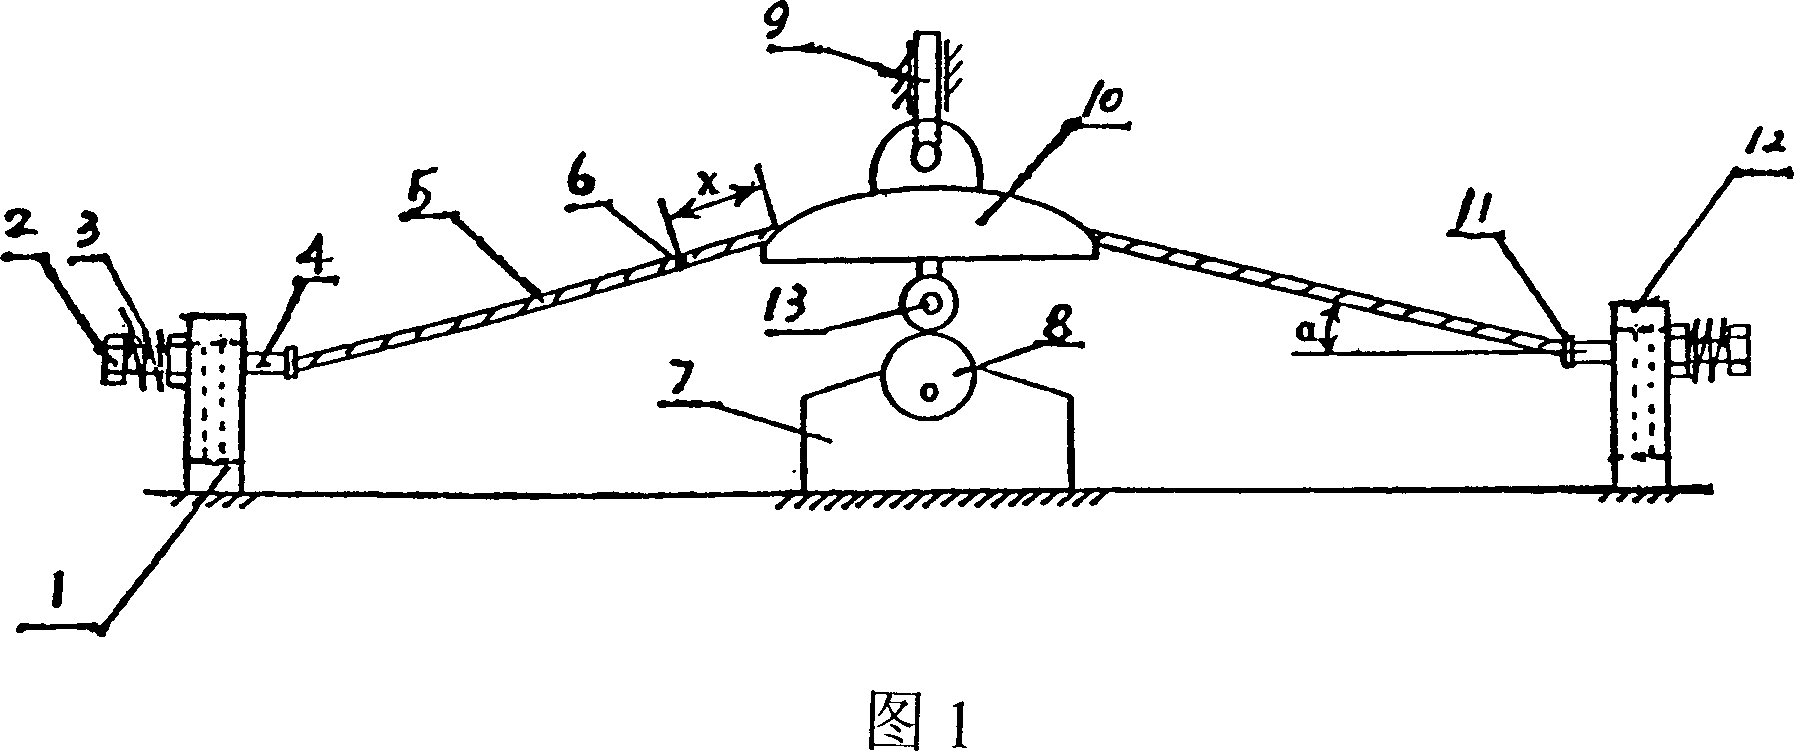 Multi-parameter adjustable cable fretting fatigue device